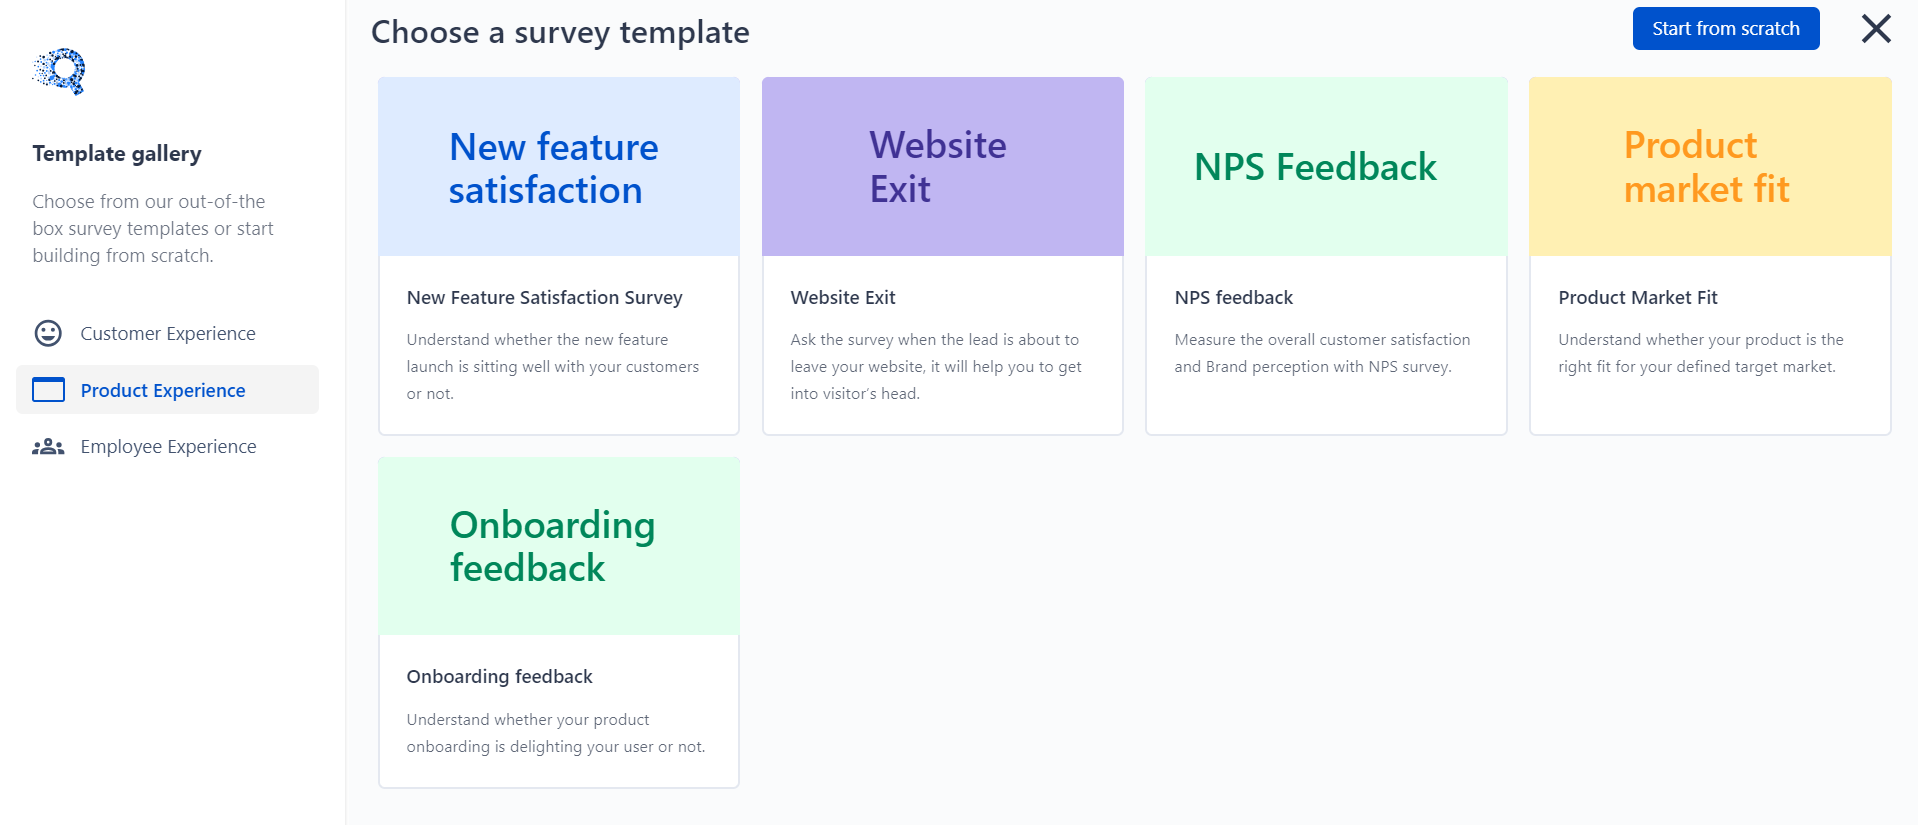 This is the image of the Product experience survey templates with different types of surveys - new feature satisfaction, website exit, NPS feedback, Product market fit, and Onboarding feedback survey. 